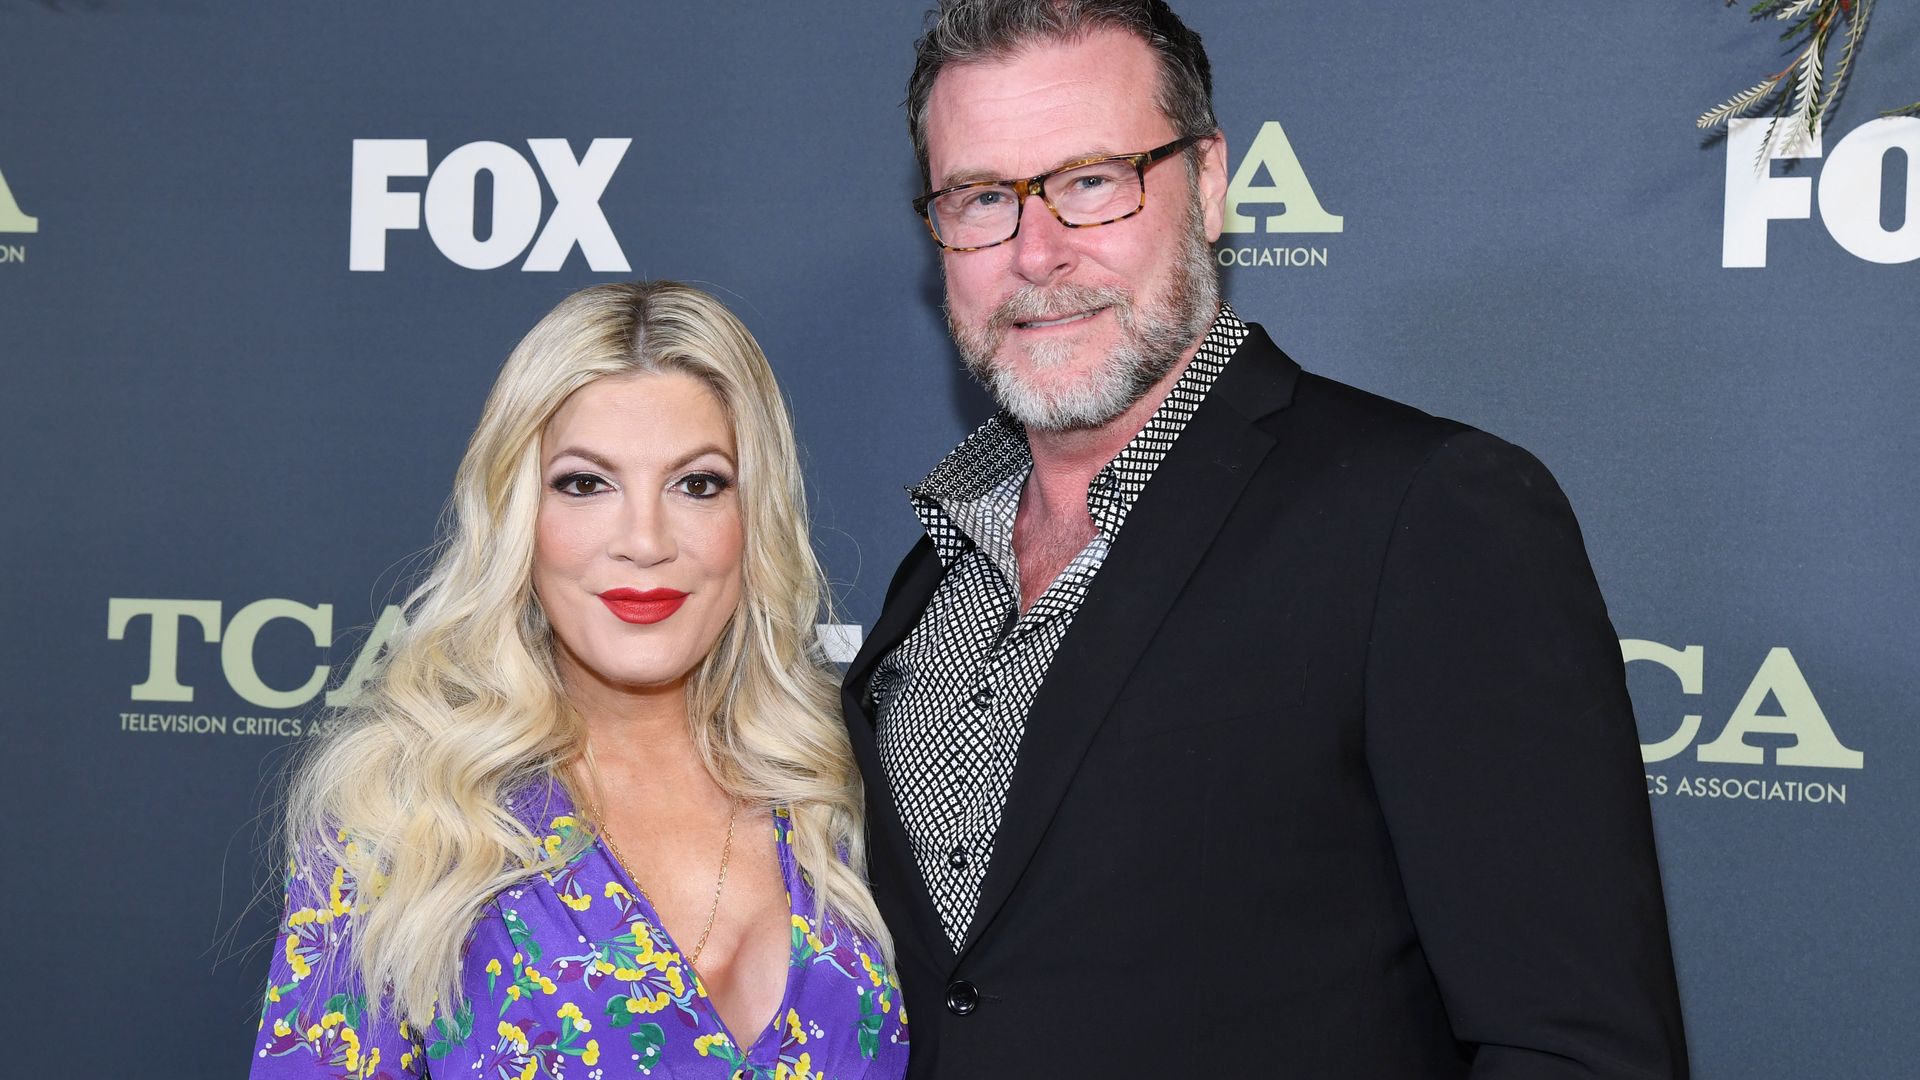 LOS ANGELES, CALIFORNIA - FEBRUARY 06: Tori Spelling and Dean McDermott attend Fox Winter TCA at The Fig House on February 06, 2019 in Los Angeles, California. (Photo by Amy Sussman/Getty Images)